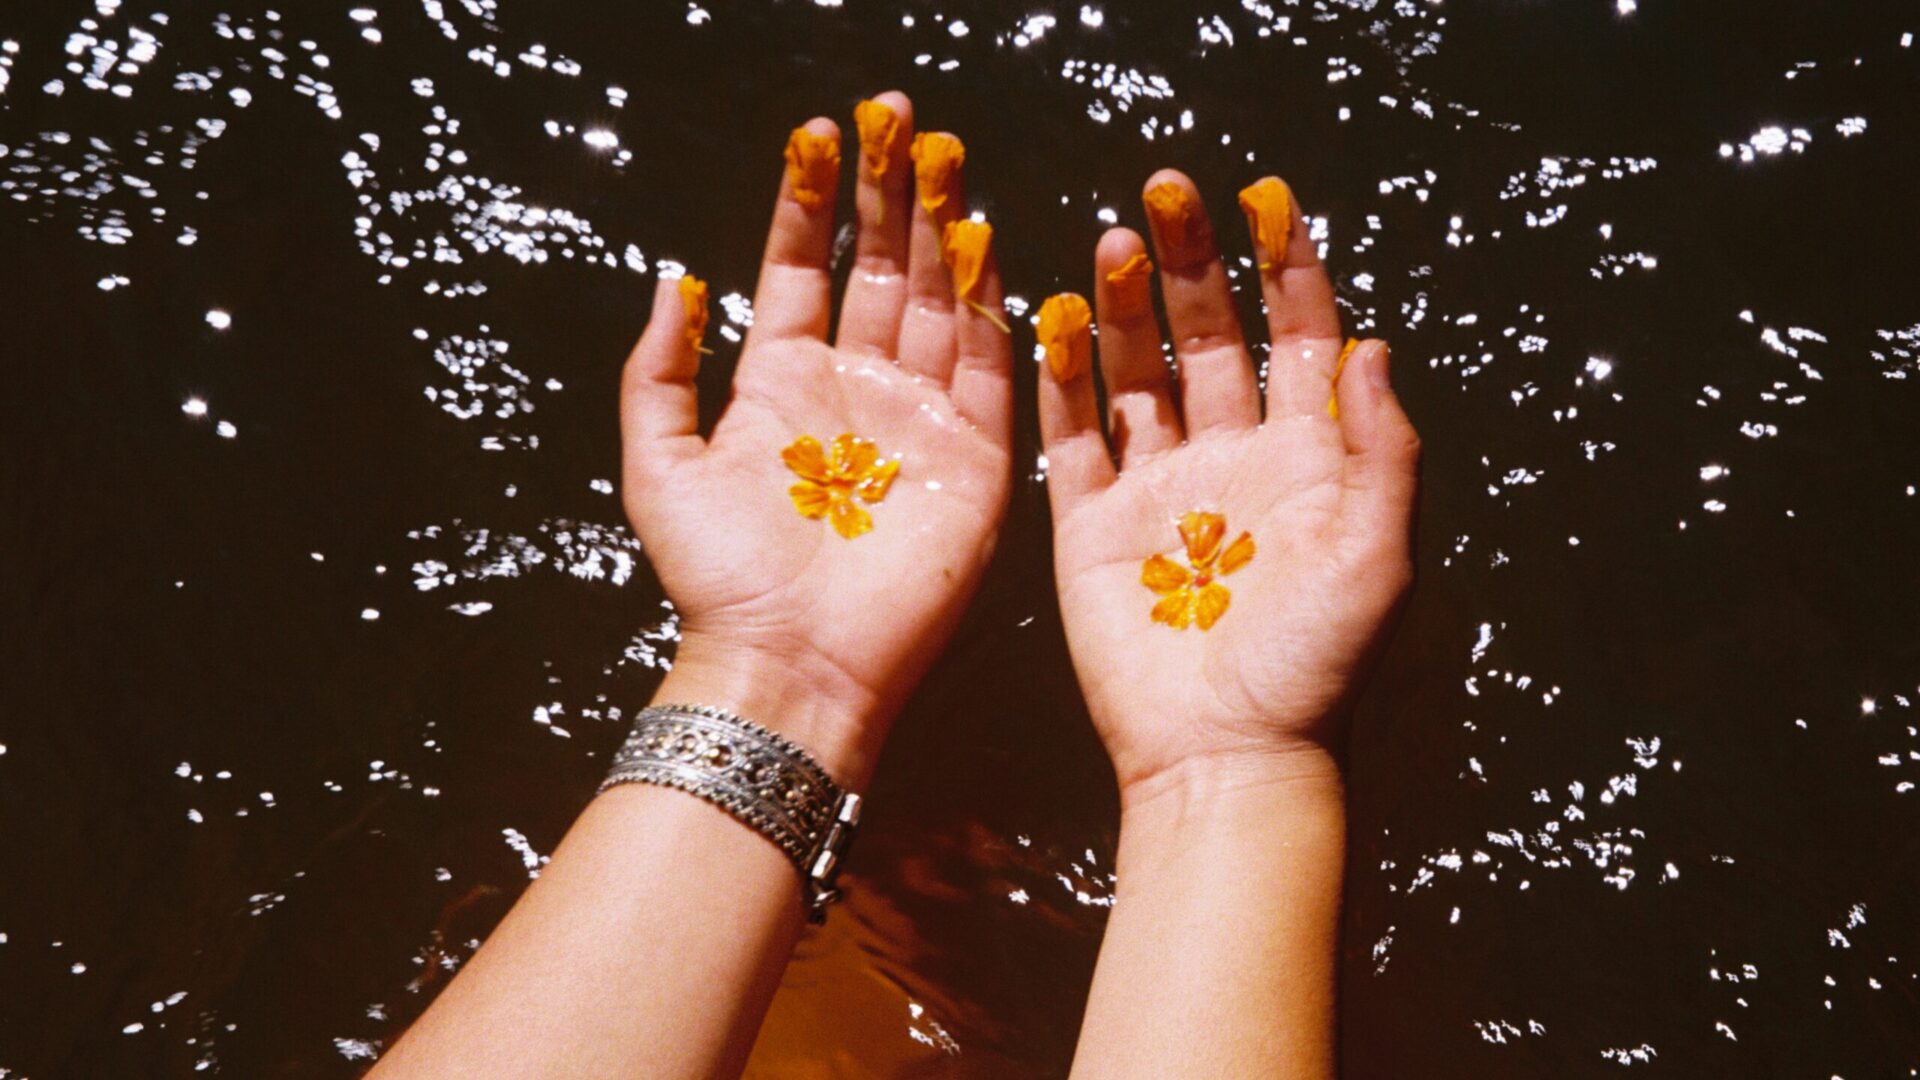 The image shows two hands held with their palms up above a body of water. In each palm is a small yellow flower and each finger is decorated with yellow flower petals. The left arm wears a silver watch and has a small rose tattoo visible.